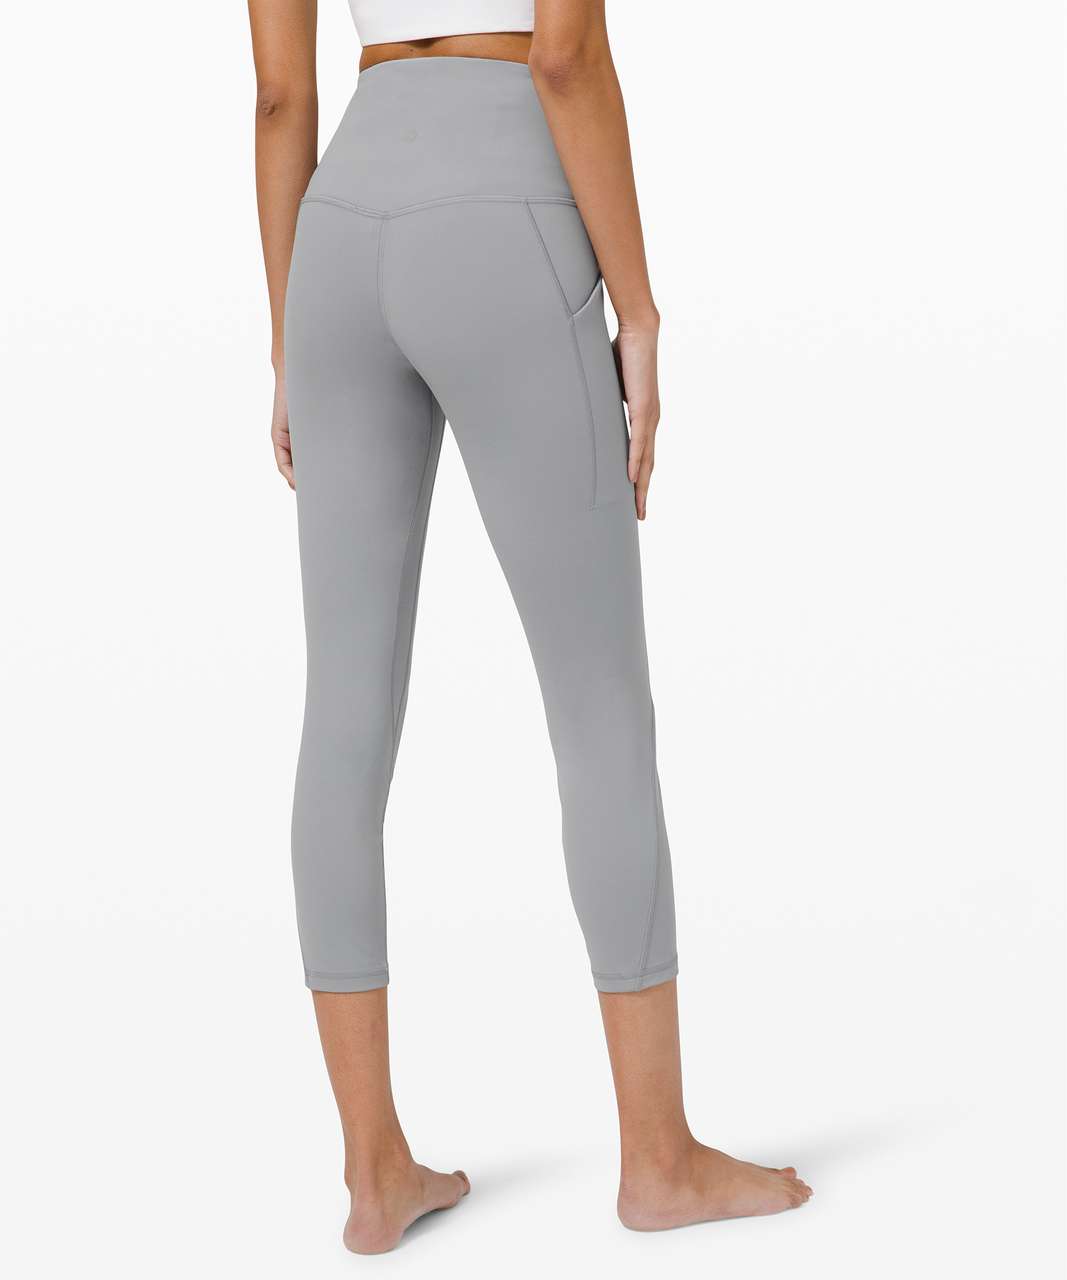 lululemon Align™ High-Rise Crop with Pockets 23